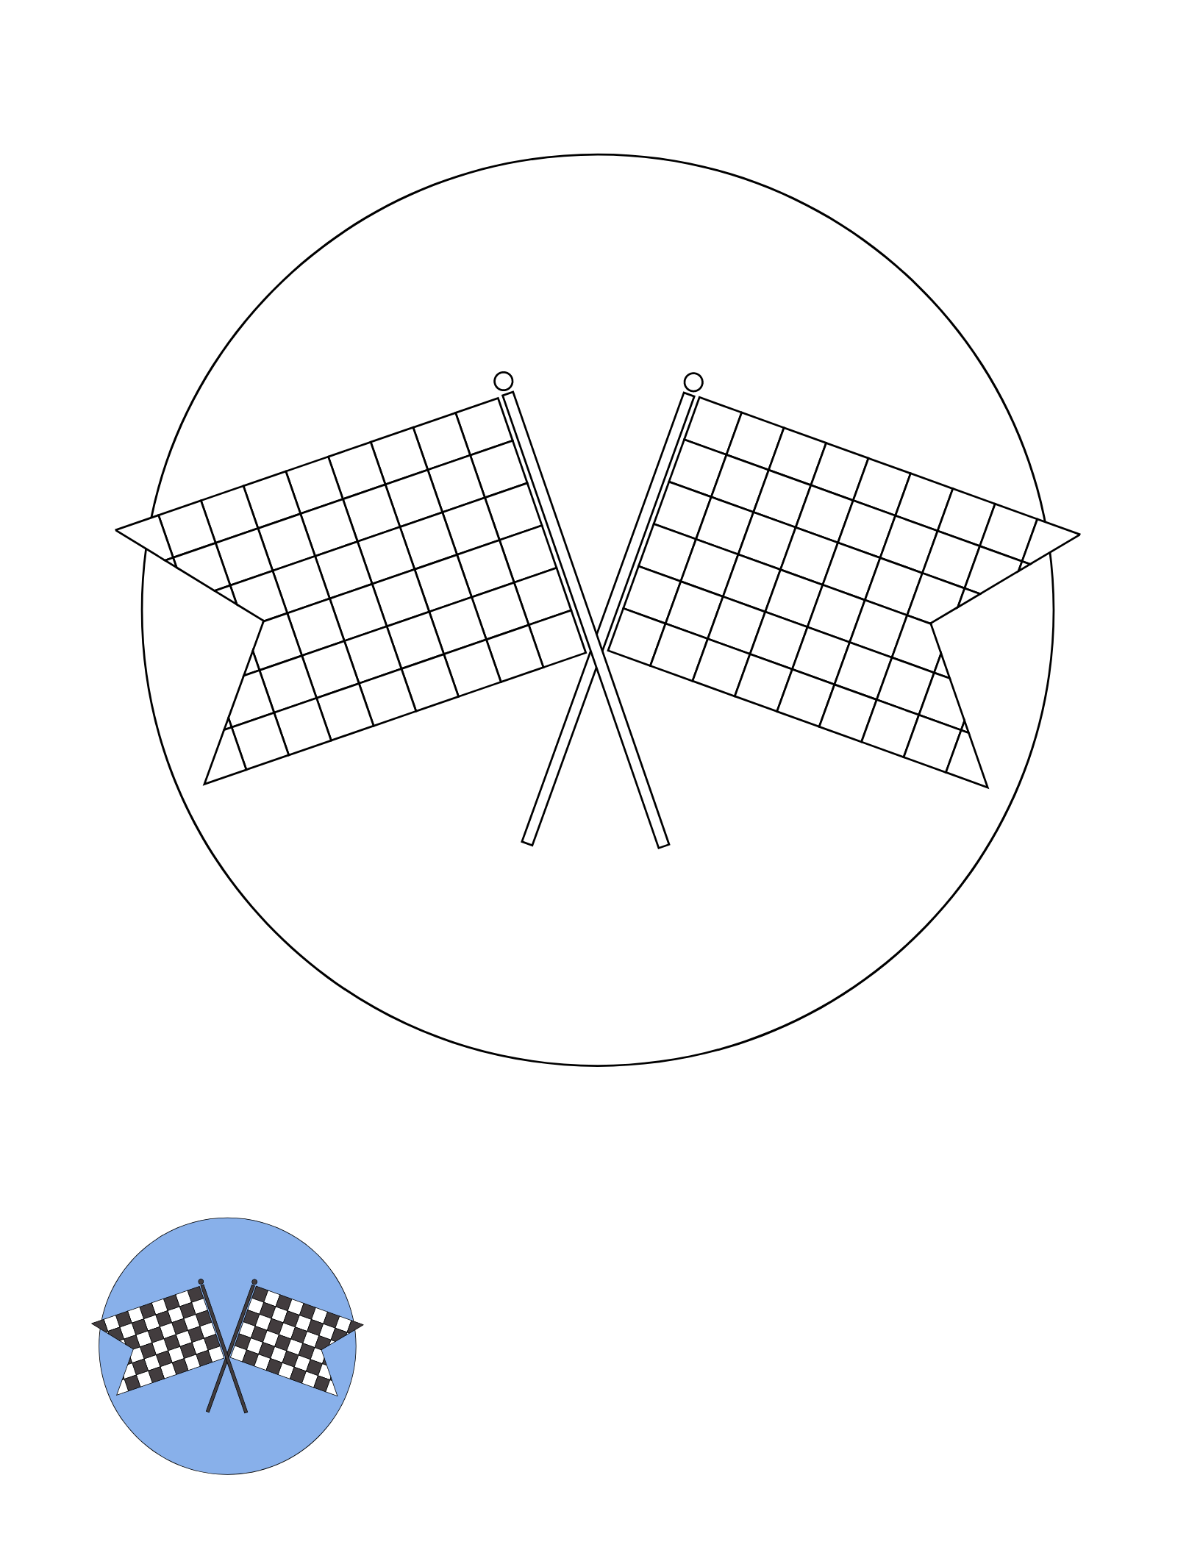 Double Checkered Flag coloring page Template